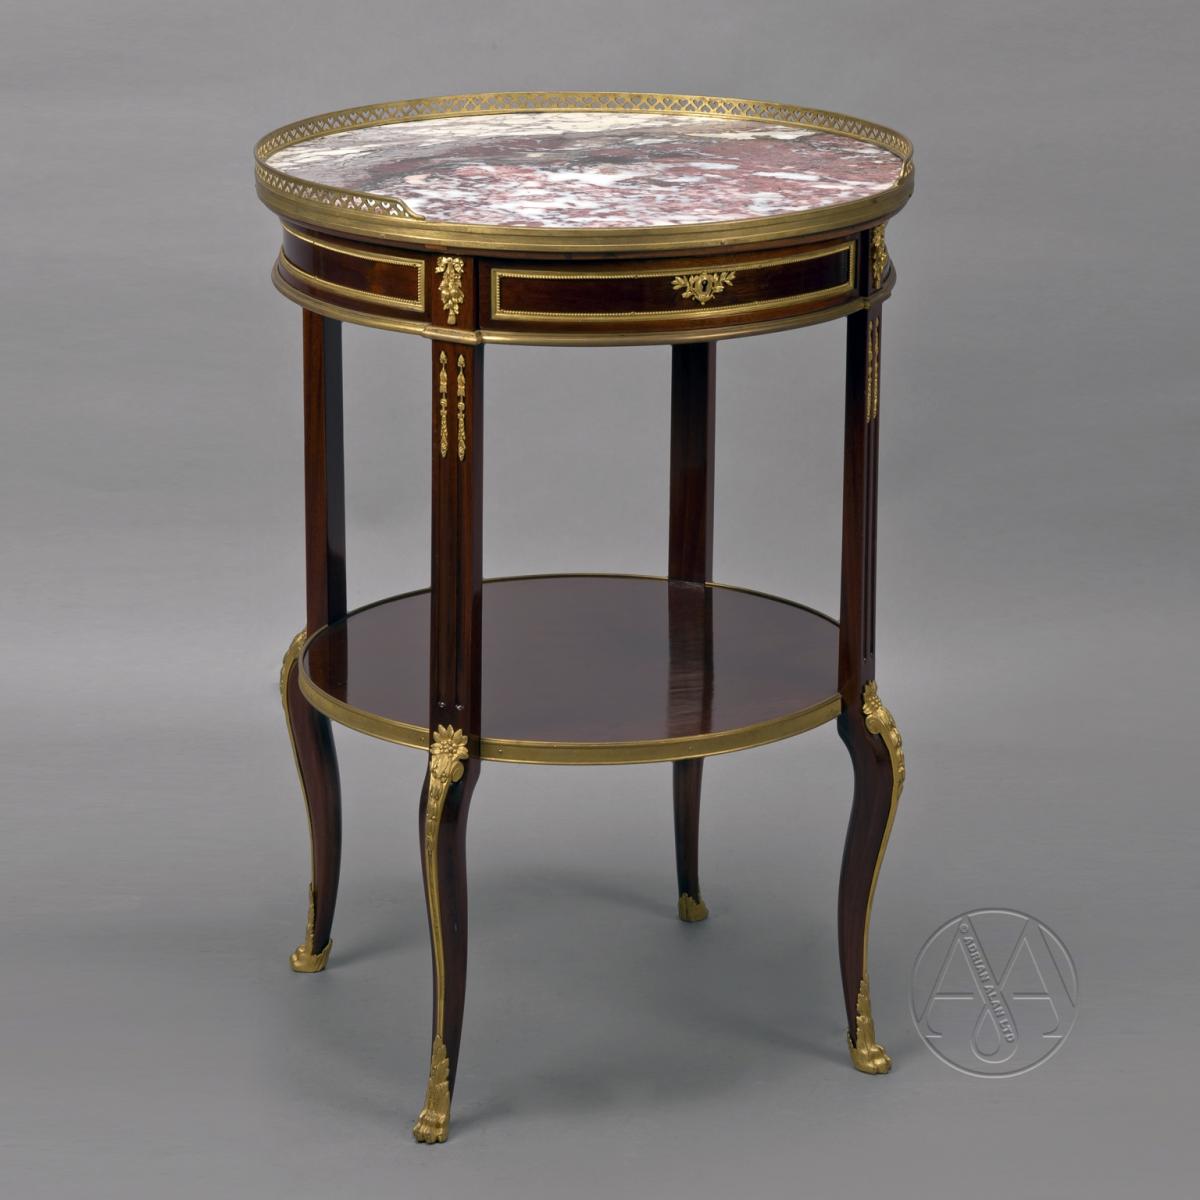 A Fine Transitional Style Gilt-Bronze Mounted Guéridon With a Breccia Marble Top, by Maison Millet